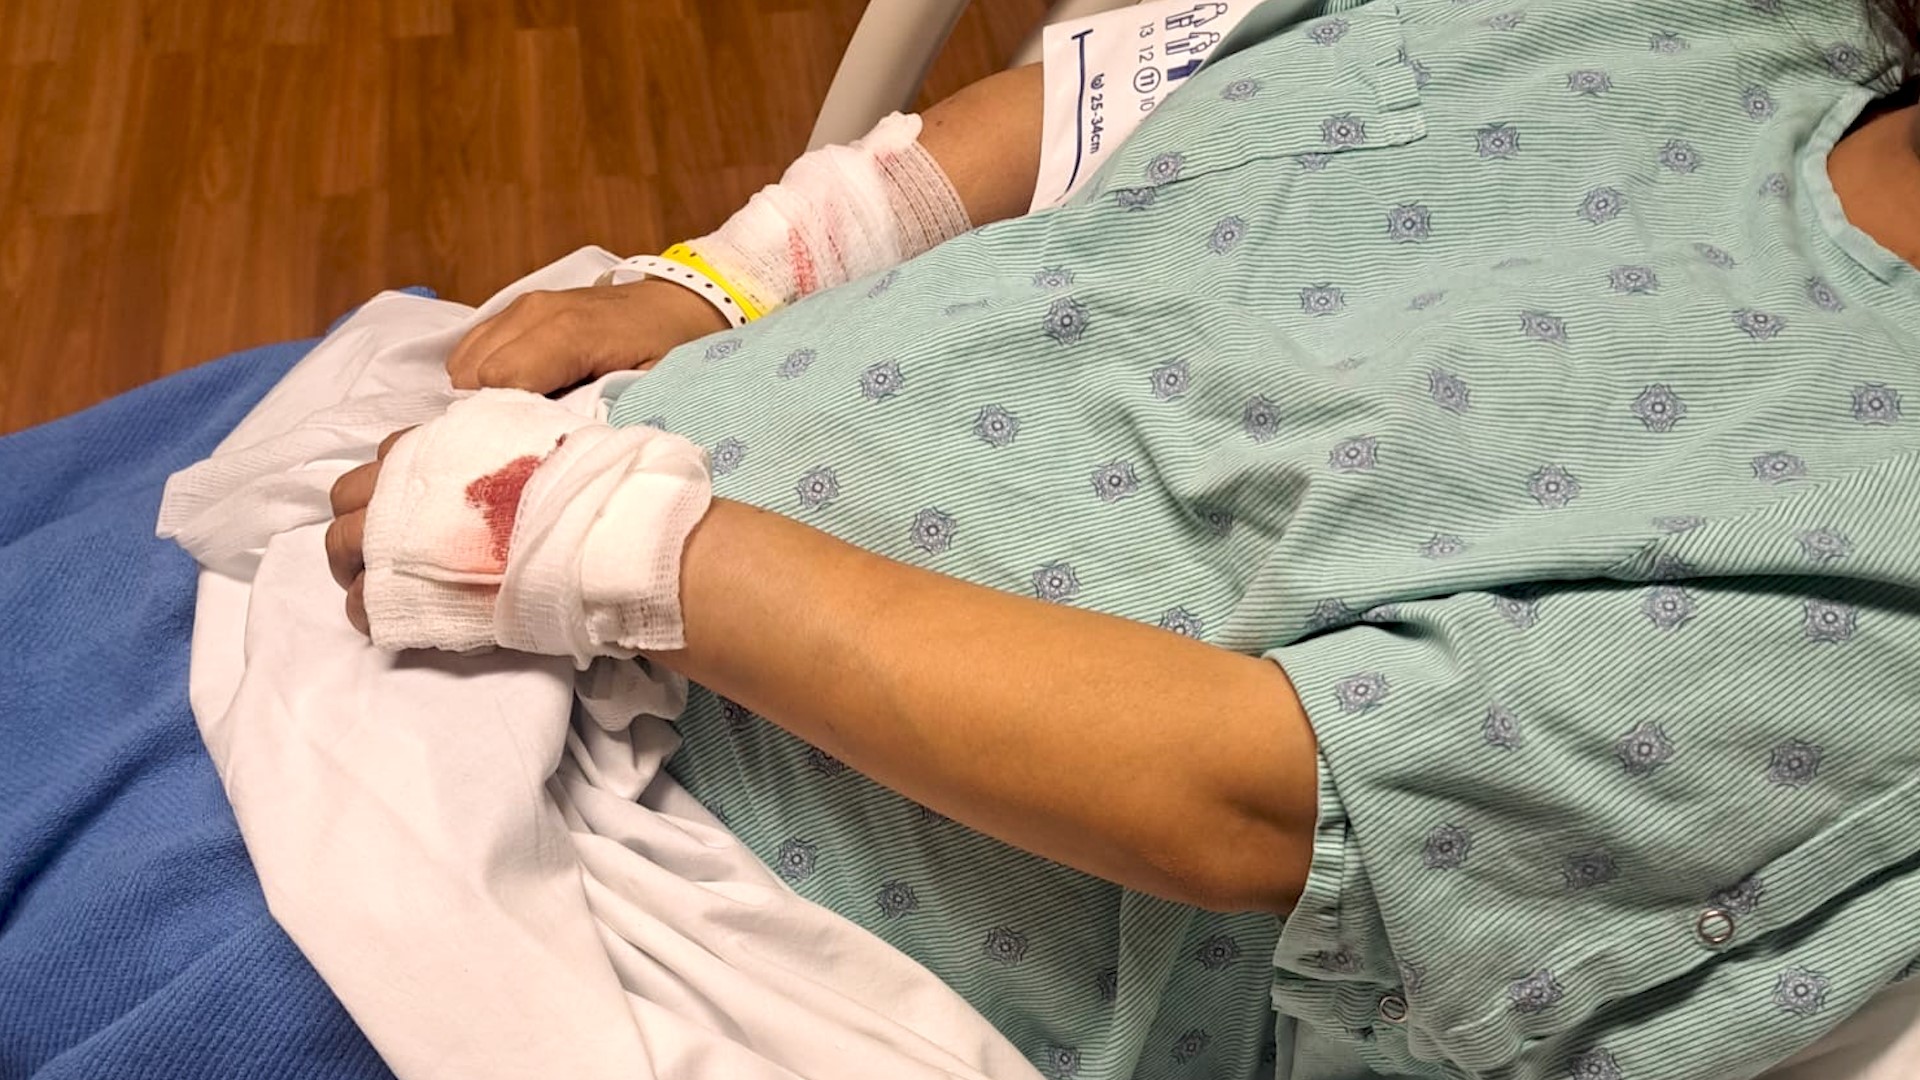 Reyna Gutierrez spent 24 hours in the hospital to monitor her baby and treatment for the bites on her hands and arms.